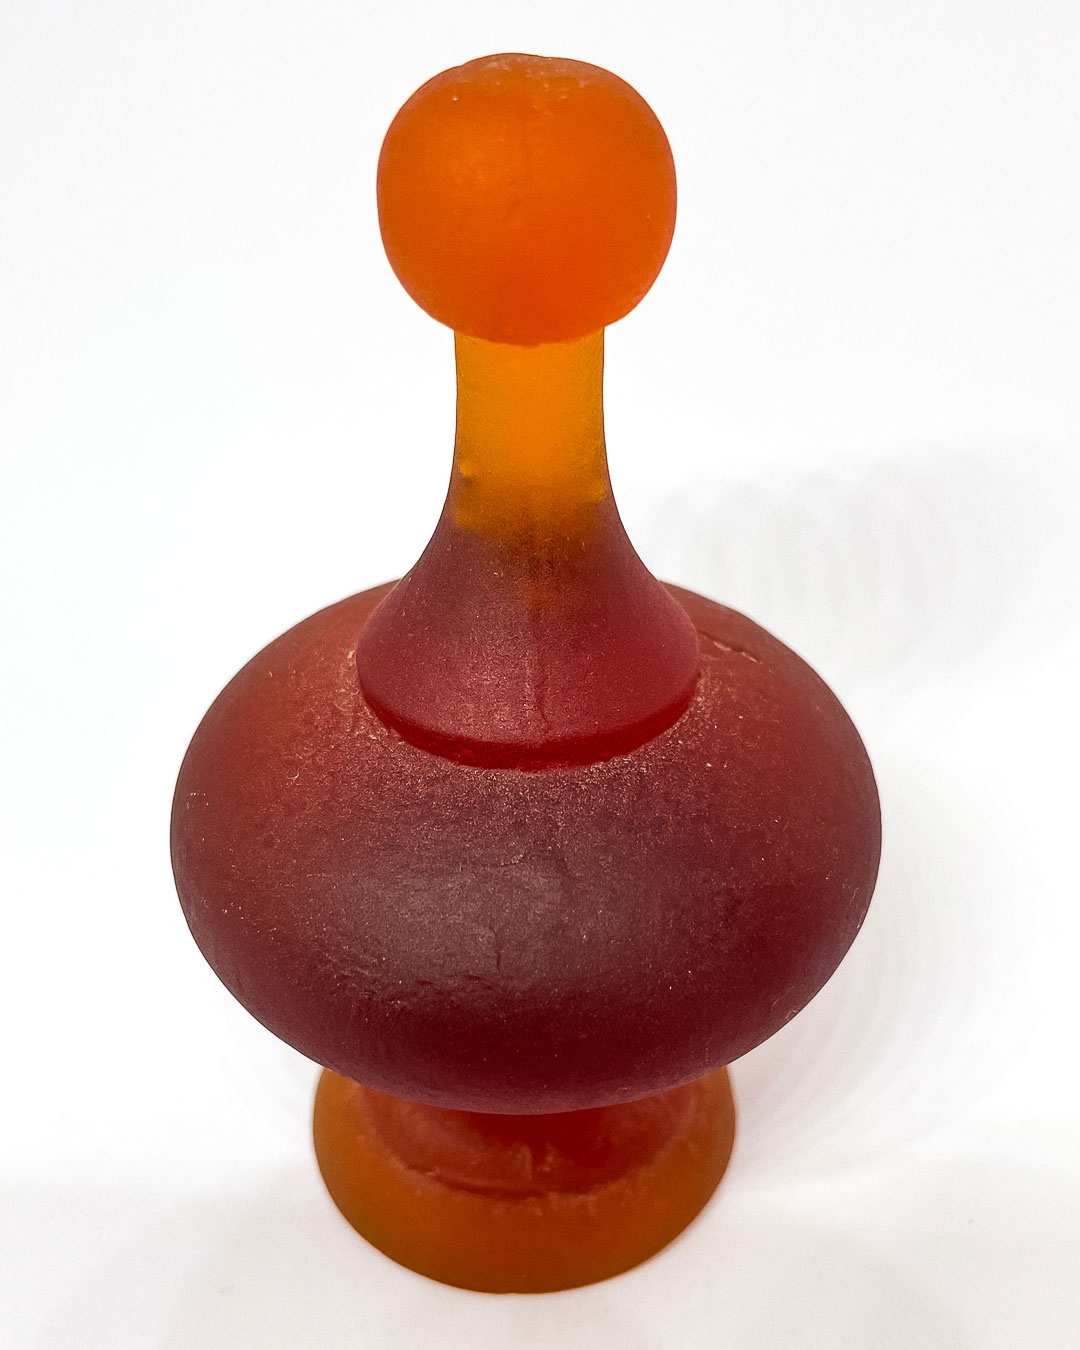 A dark Orange Cast Glass Finial  lit to showcase its intricate curves and varying depths, highlighting the glass's colour tones and translucency.